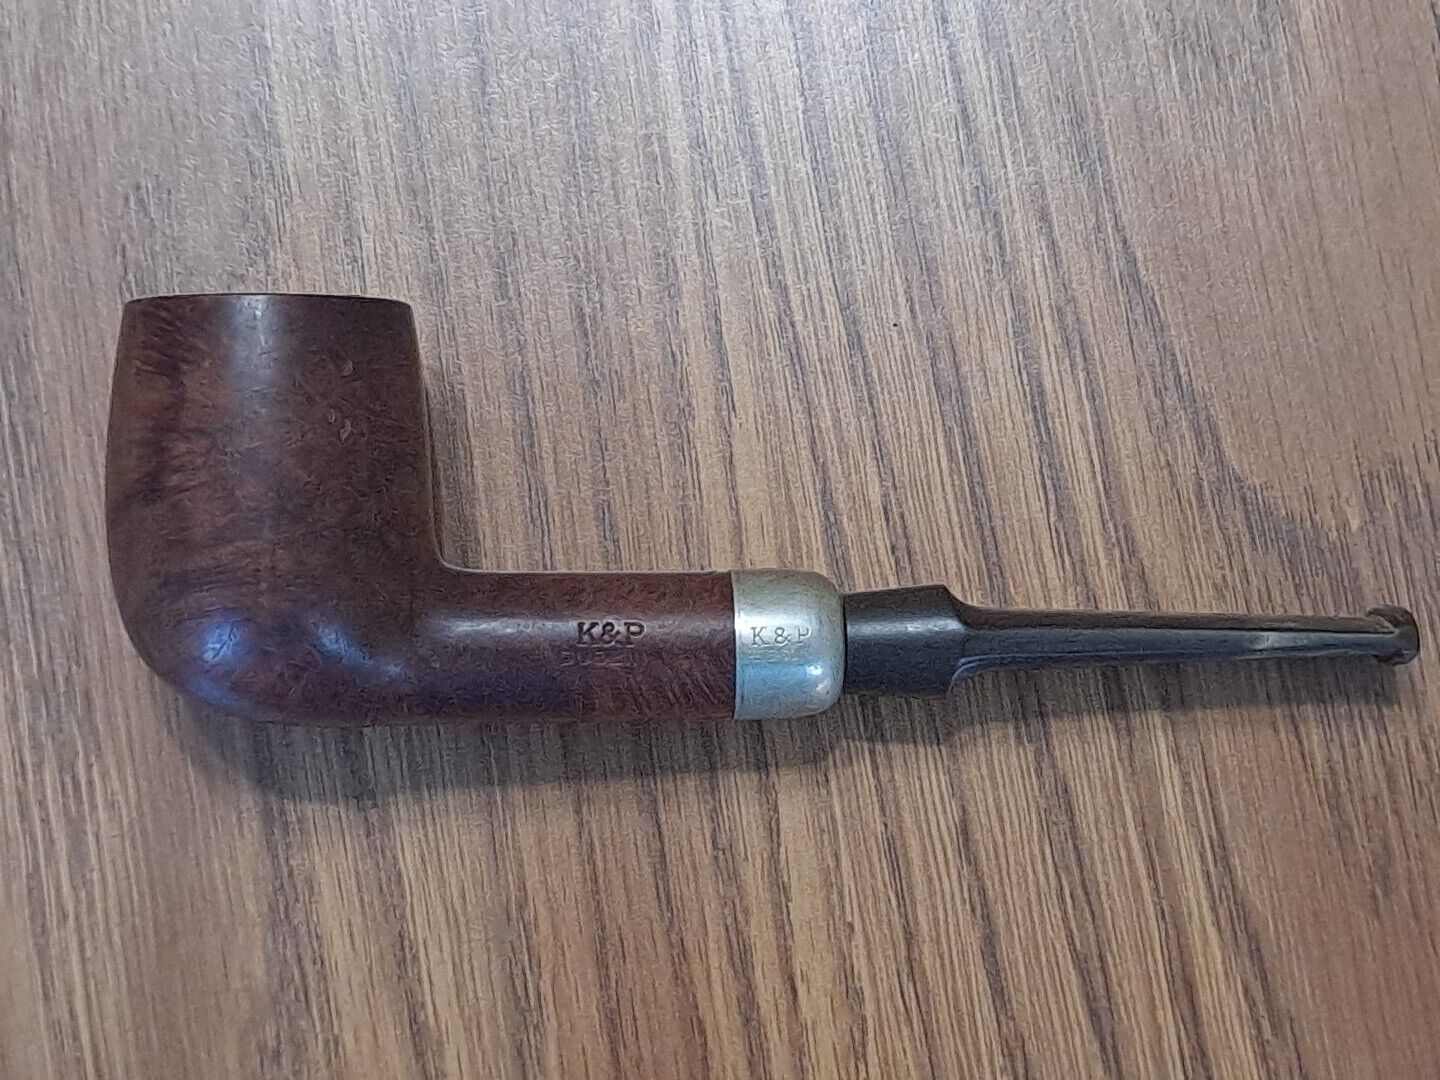 K&P Peterson Dublin Made in Republic of Ireland # 106 Vintage Estate Pipe Smoked